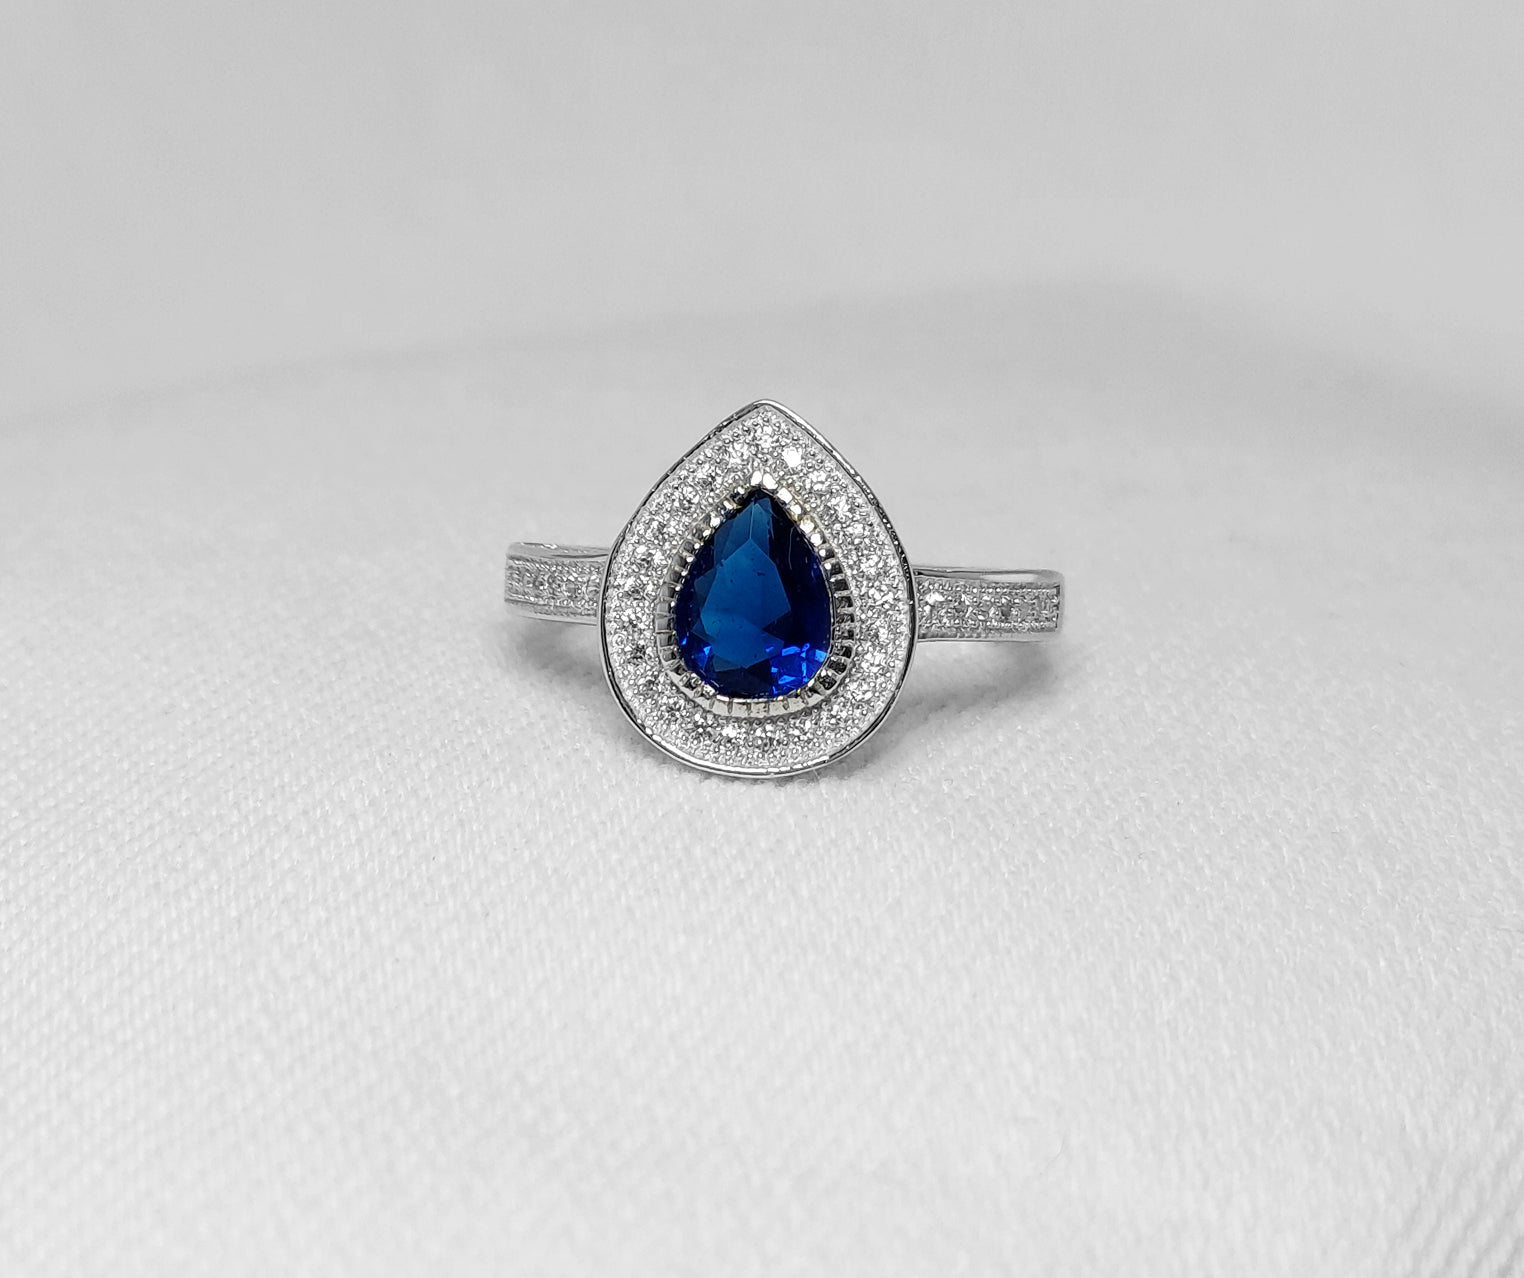 Cubic Ring - Sterling Silver  with Blue Cubic Zirconia Stone